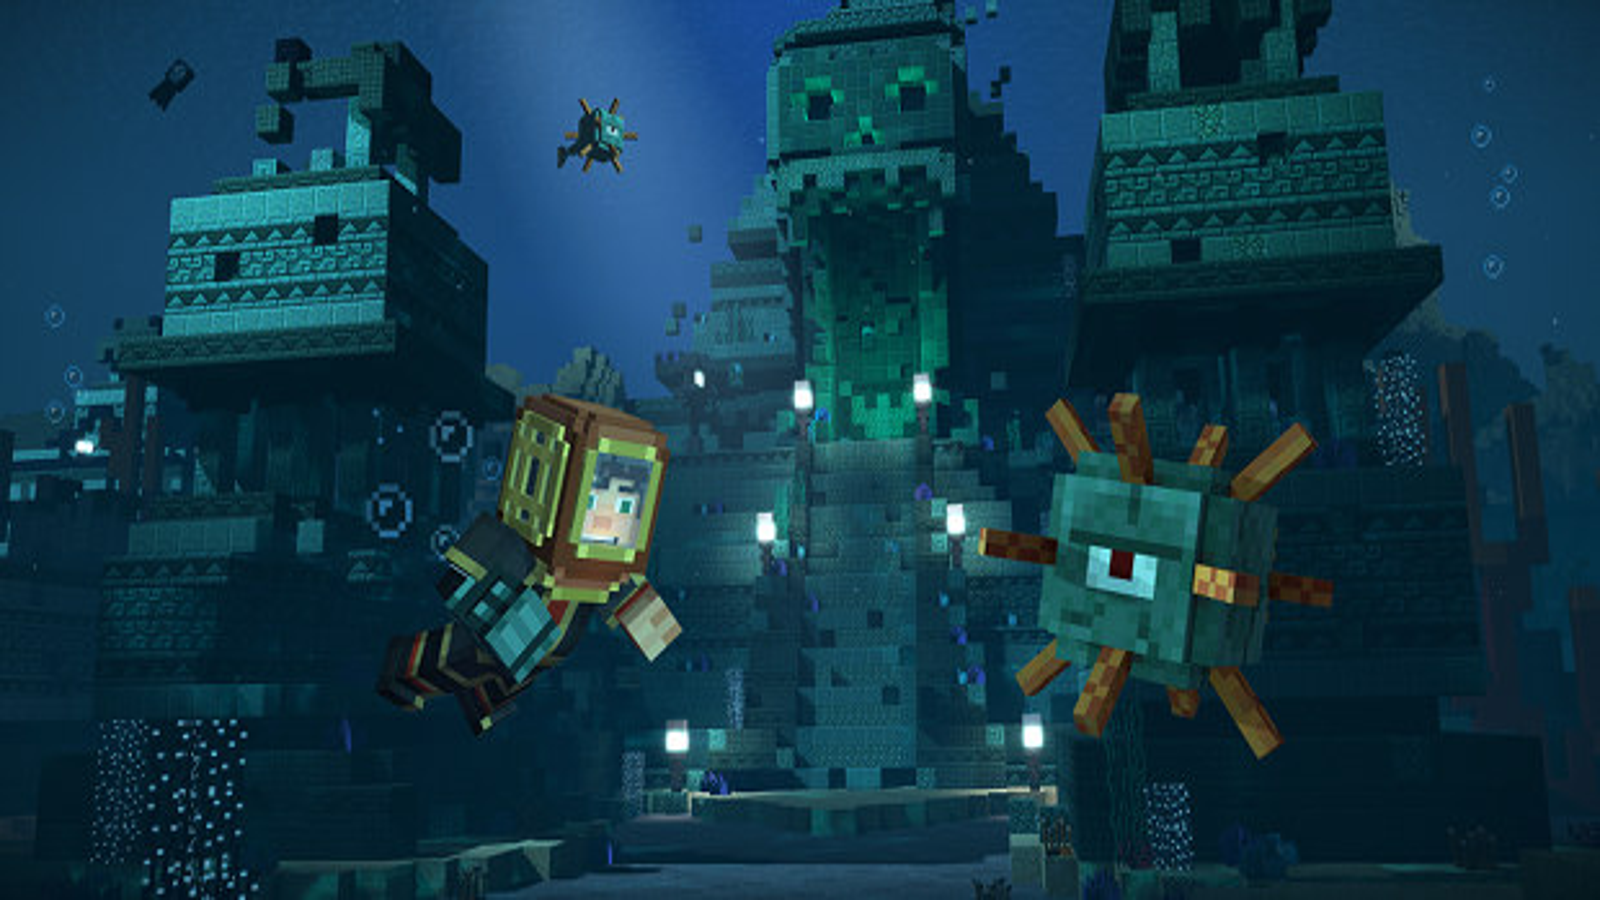 Minecraft: Story Mode' Arrives on iOS, Android